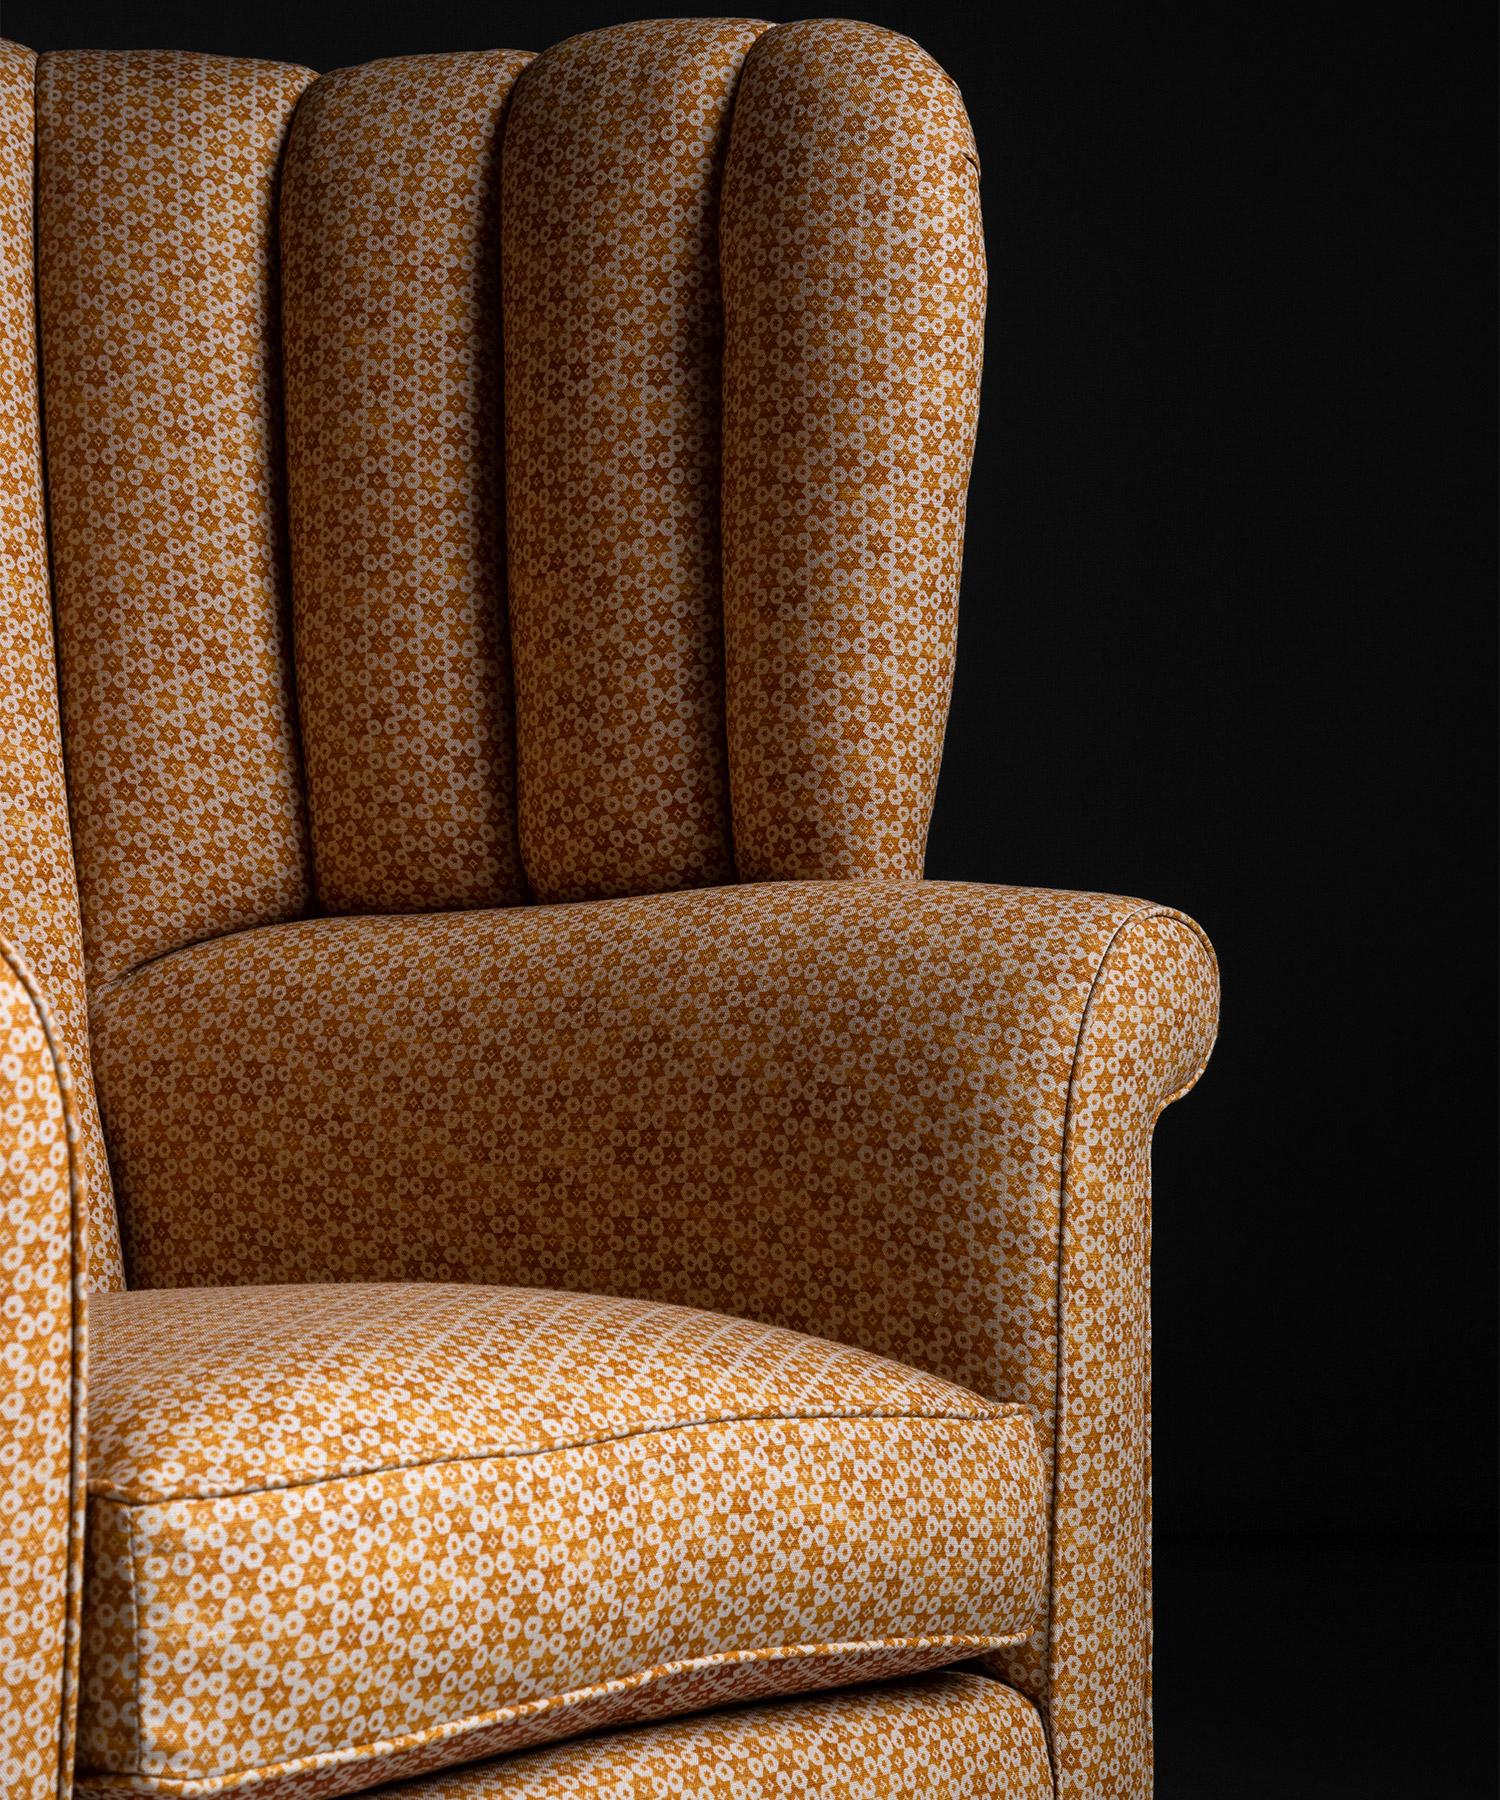 19th Century Barrel Back Chair in Patterned Linen by Zak + Fox, England, Circa 1810